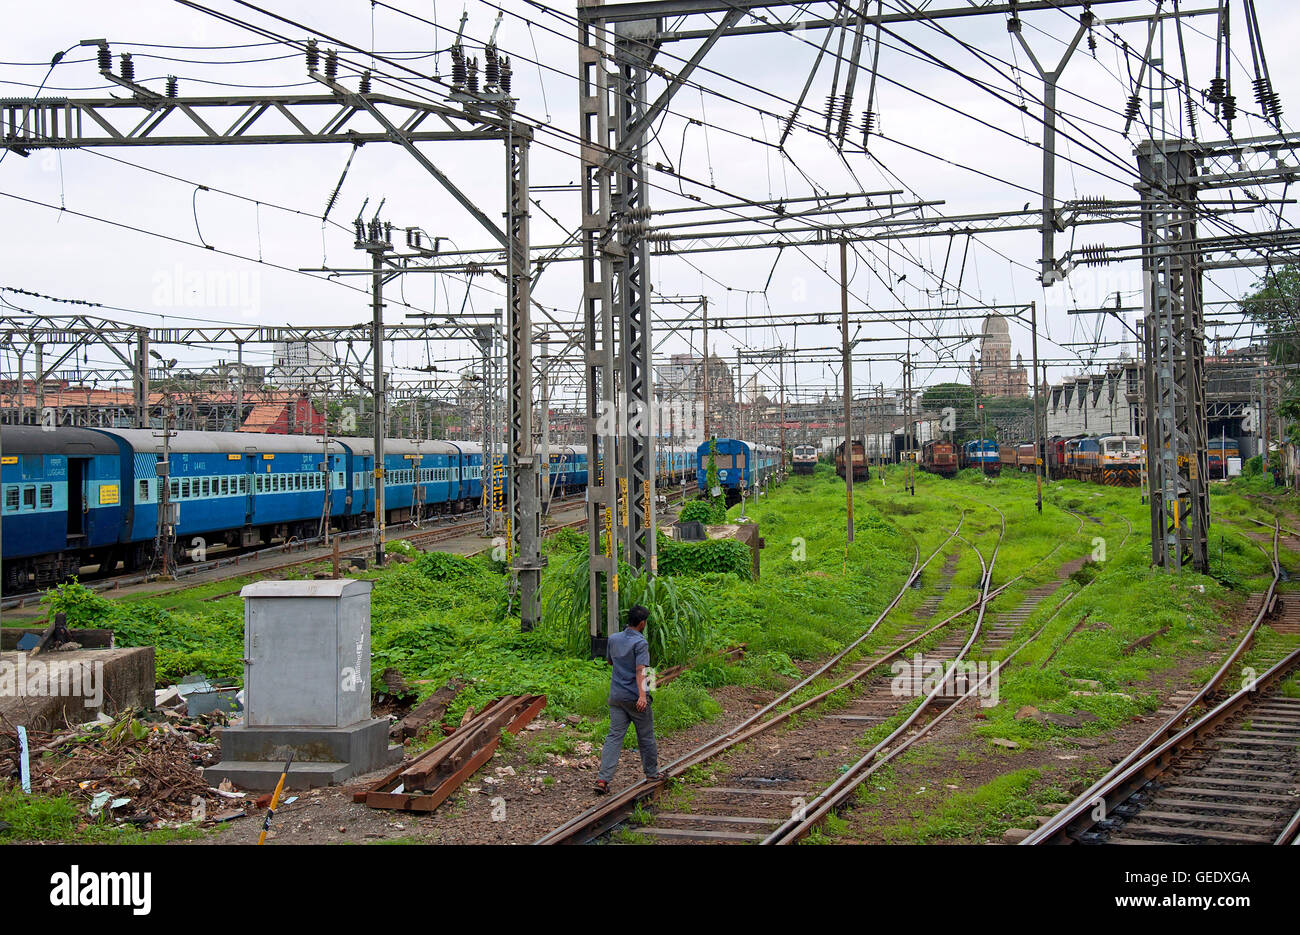 The image of Trains and CST station building or VT station, Mumbai India Stock Photo